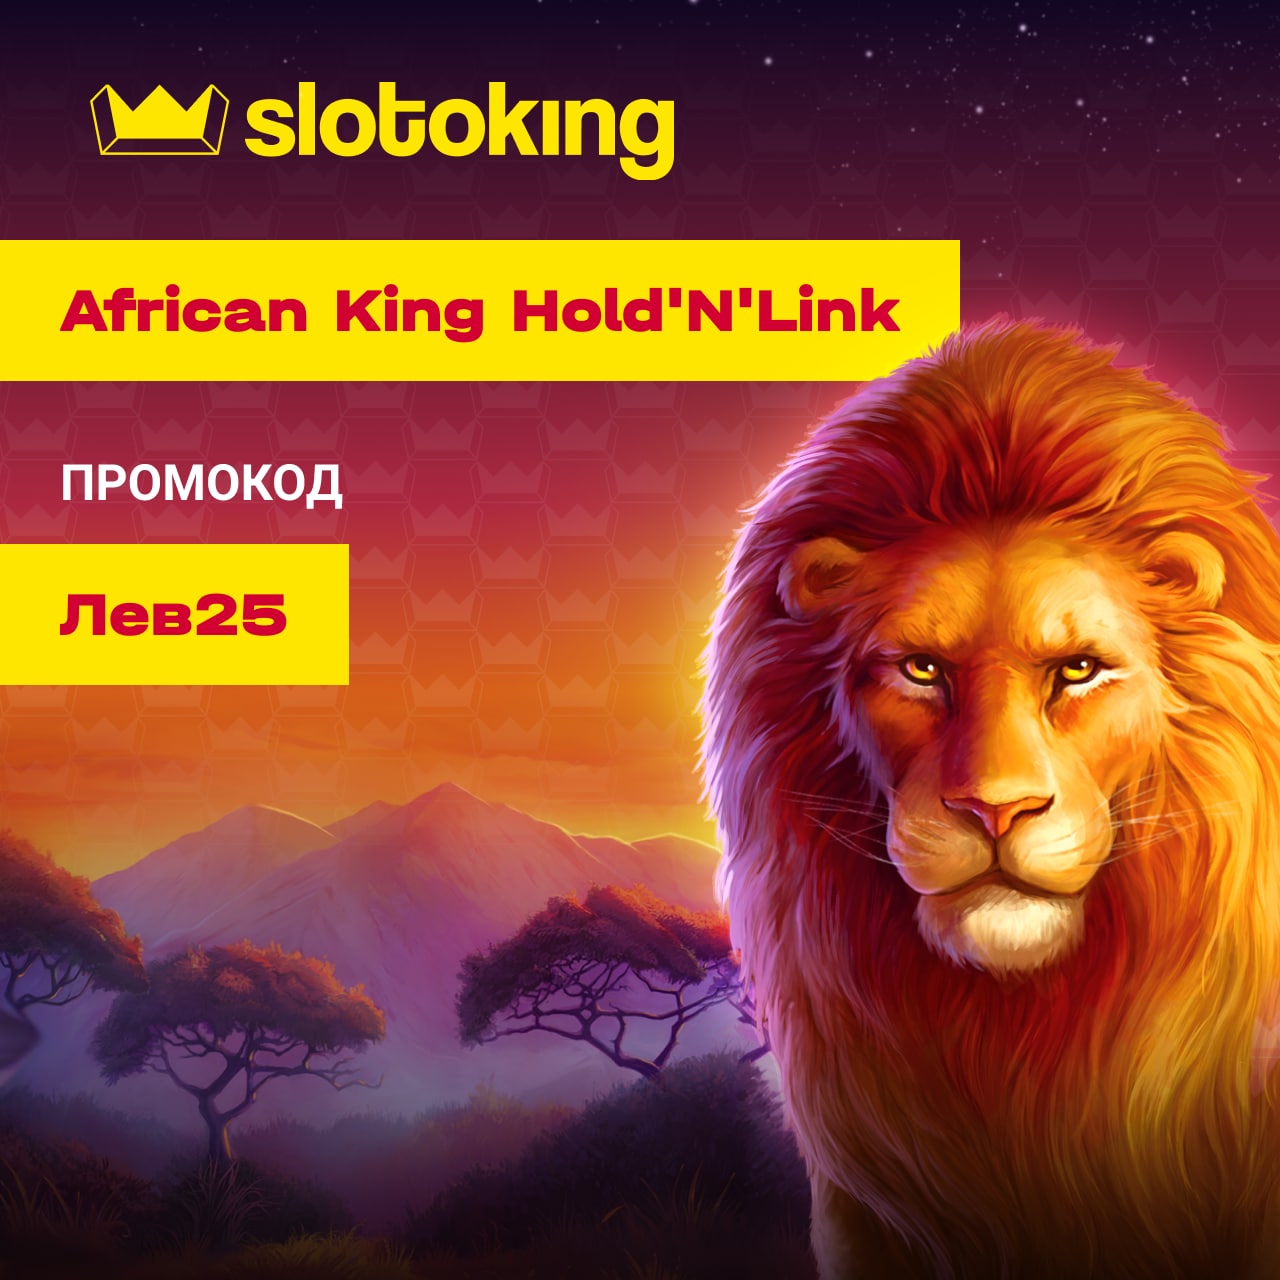 African King Hold'N'Link